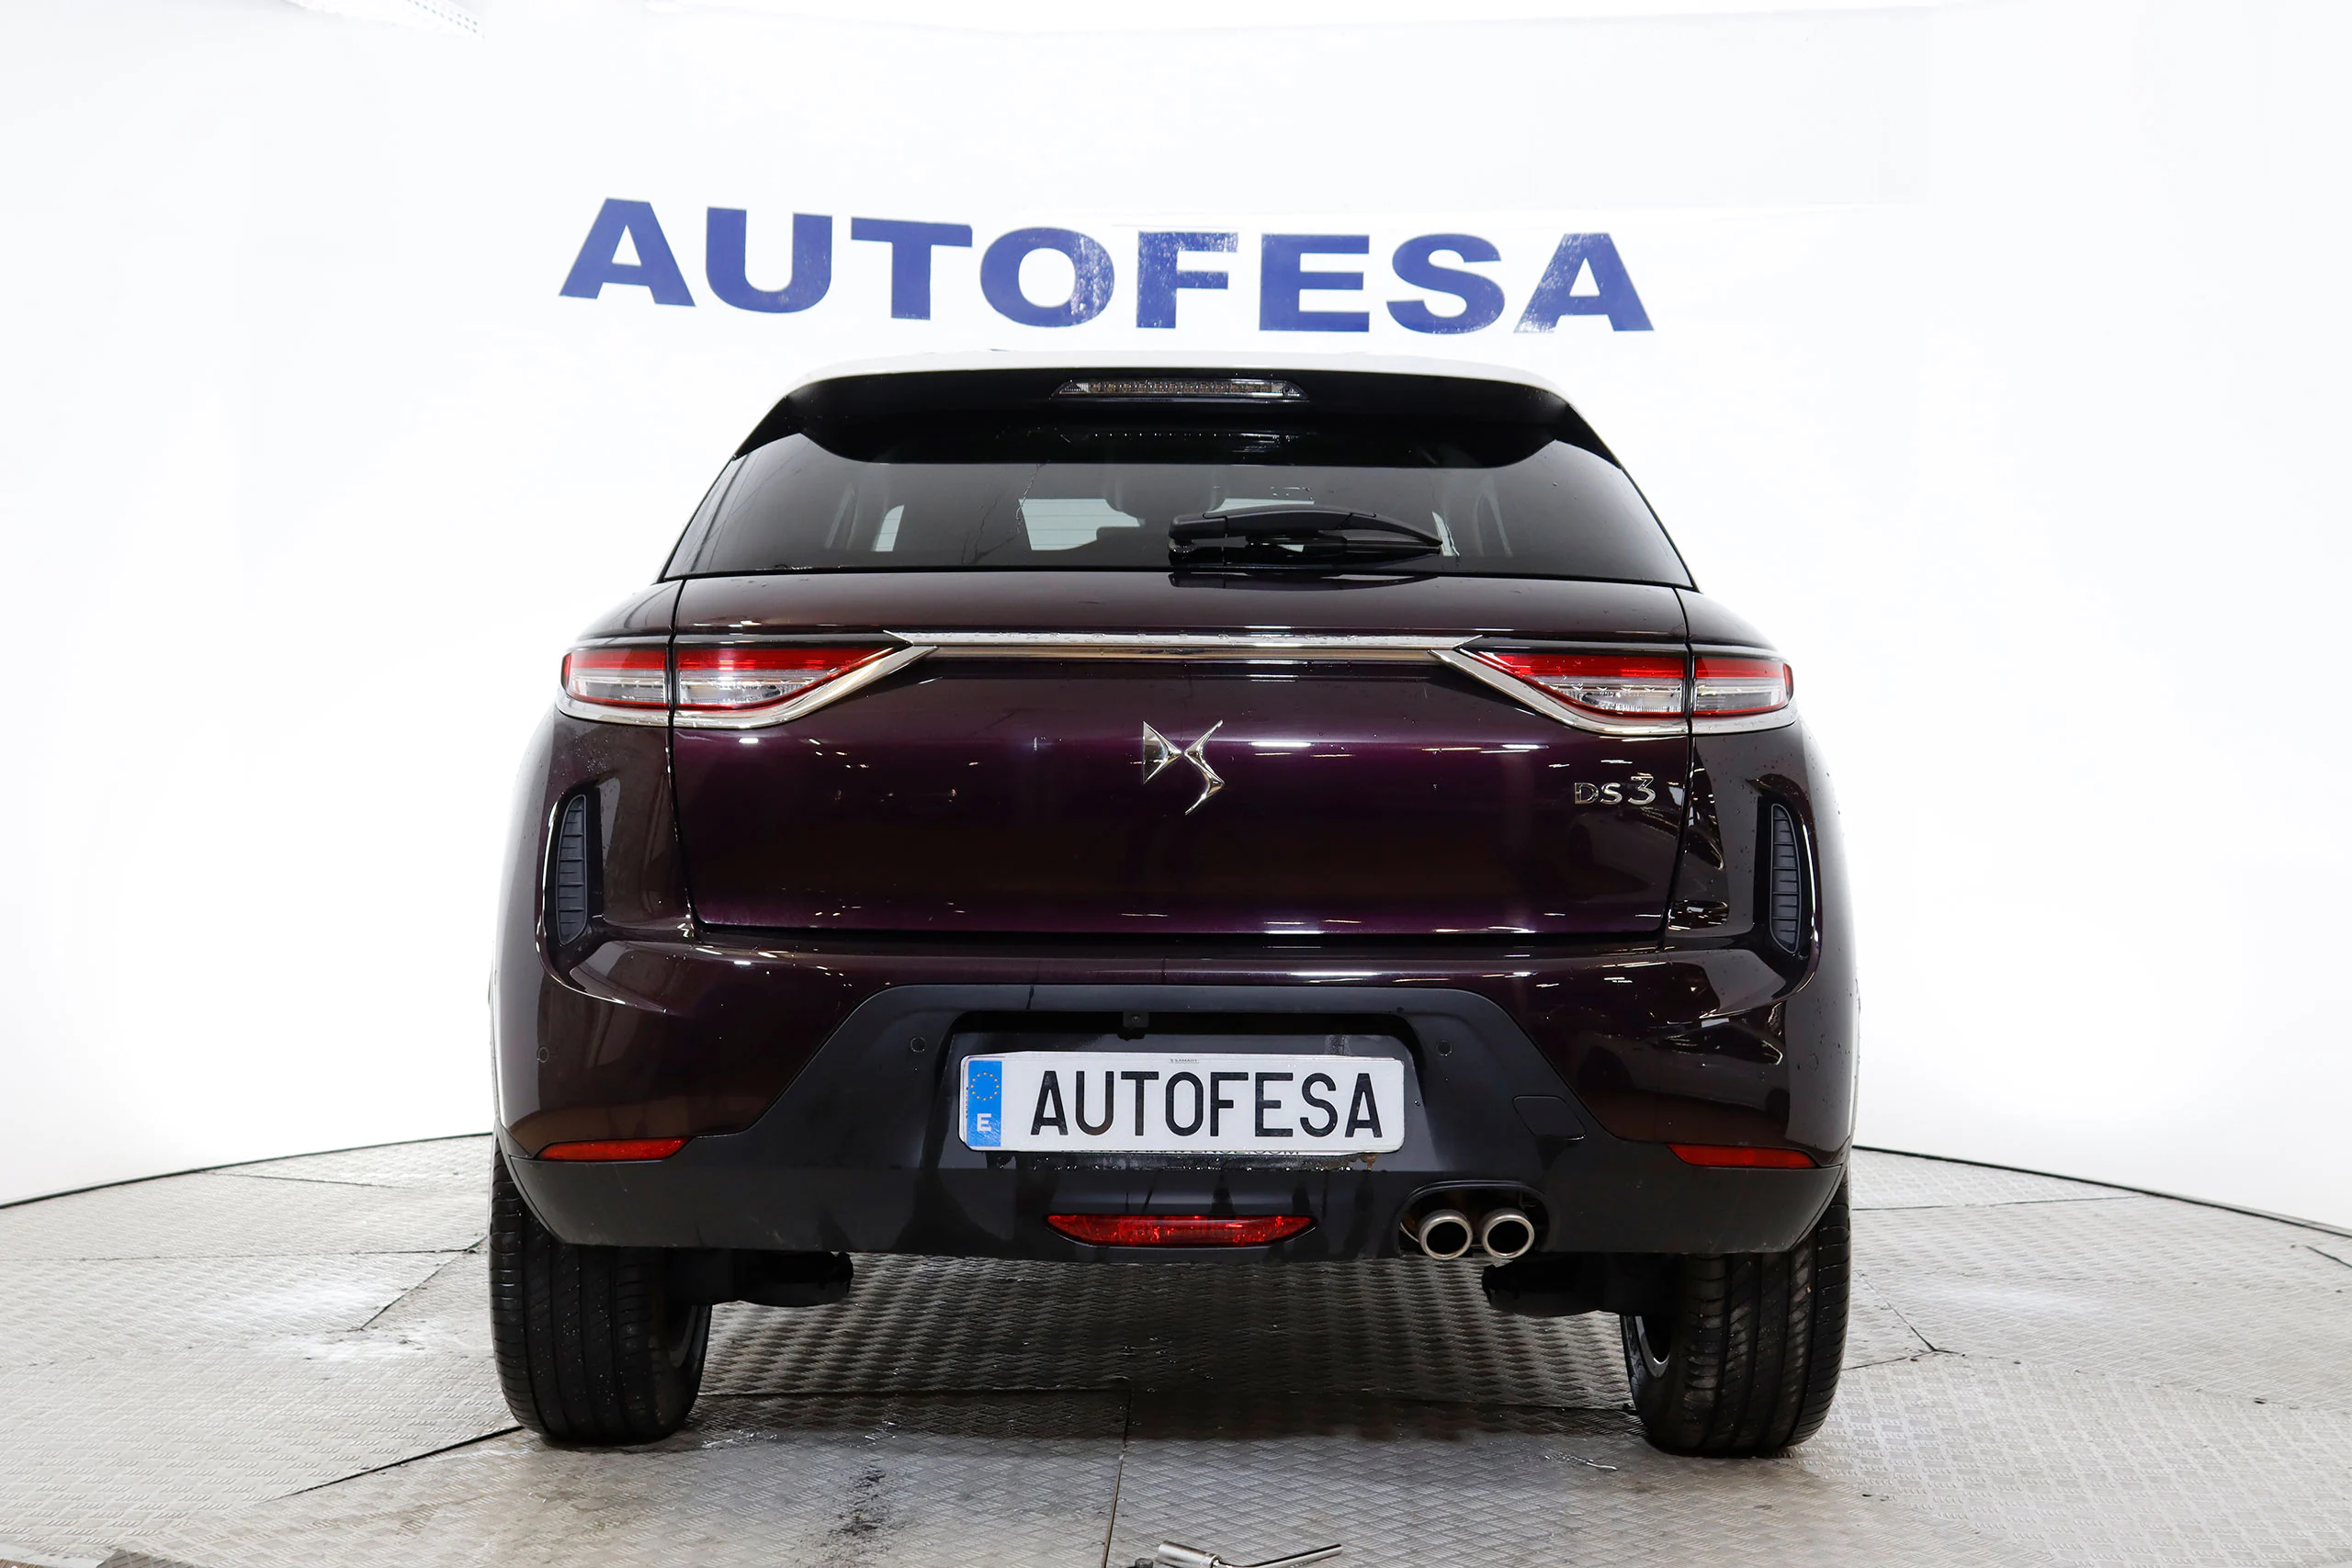 DS DS 3 Crossback 1.2 Grand Chic 130cv Auto 5P S/S # NAVY, FAROS LED - Foto 7